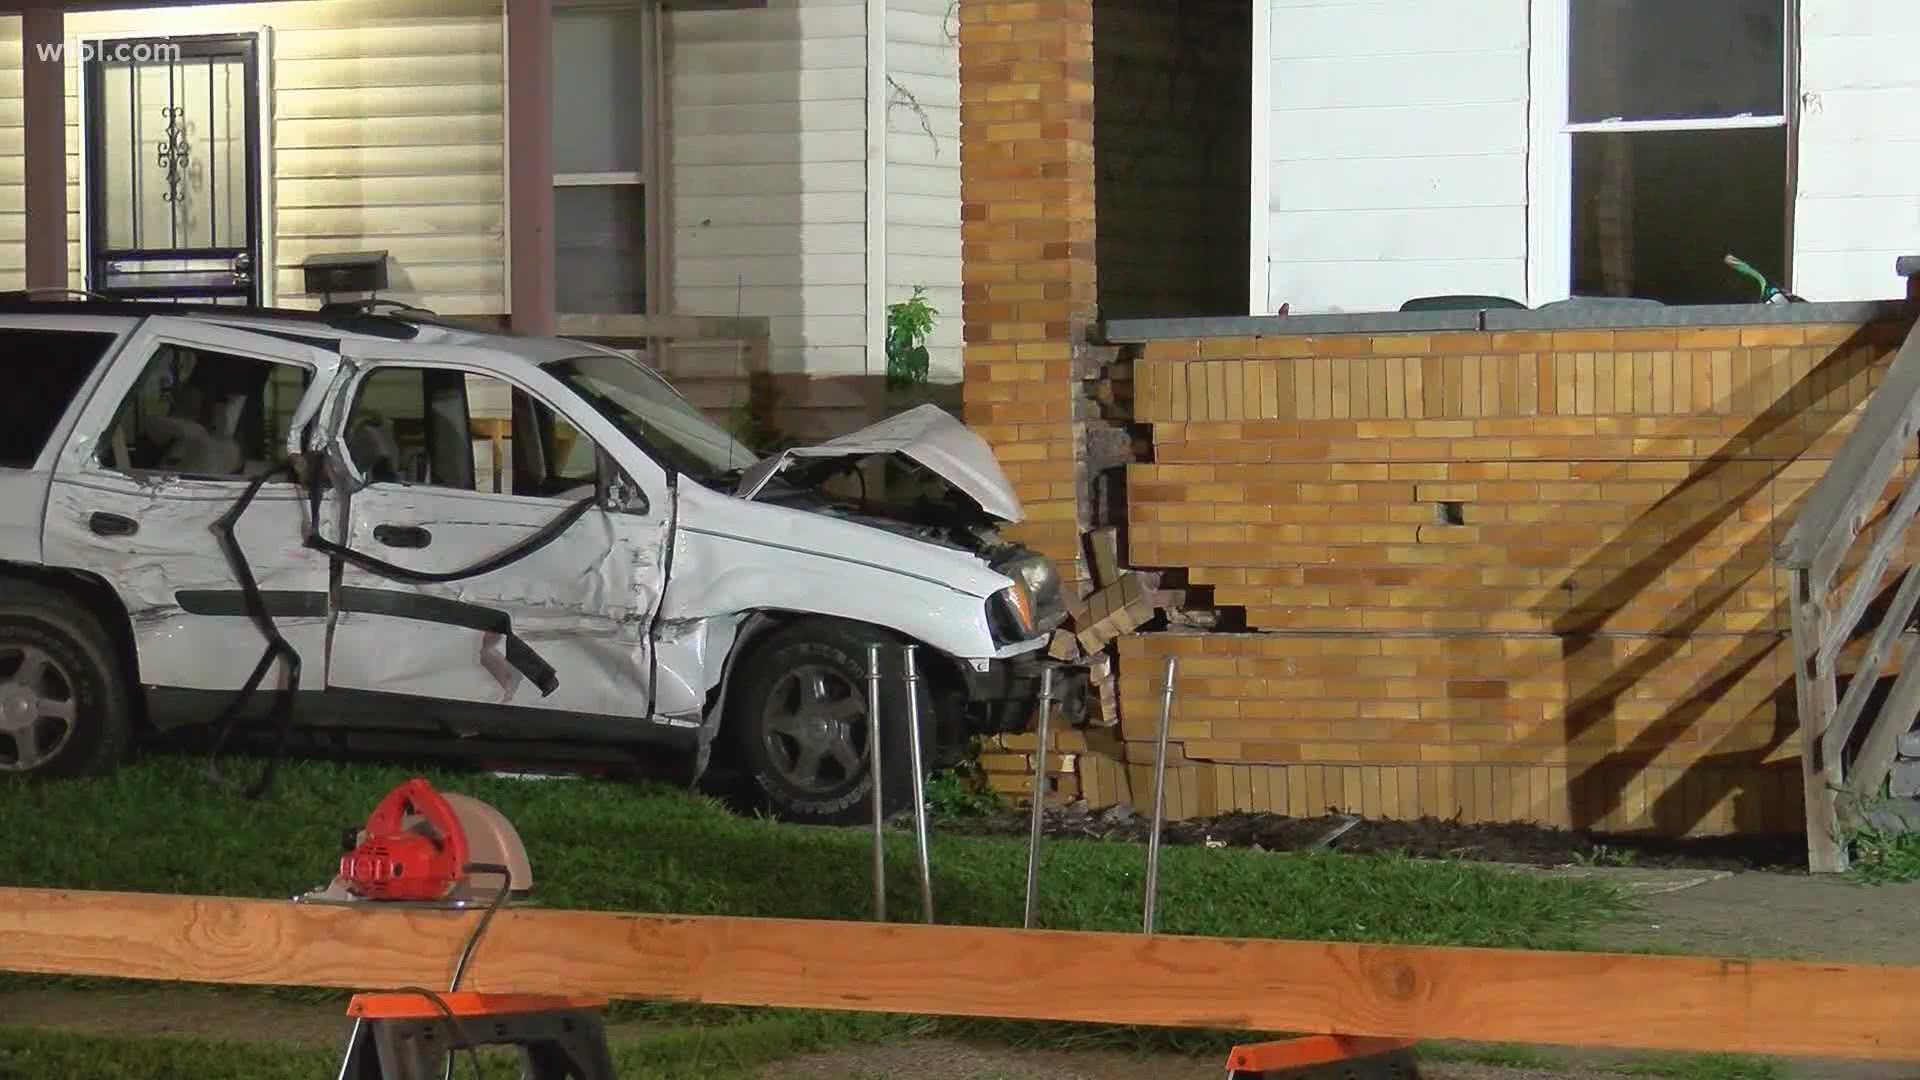 A white SUV slammed into a red Chevy truck before ricocheting into a house, the impact causing the porch to nearly buckle.